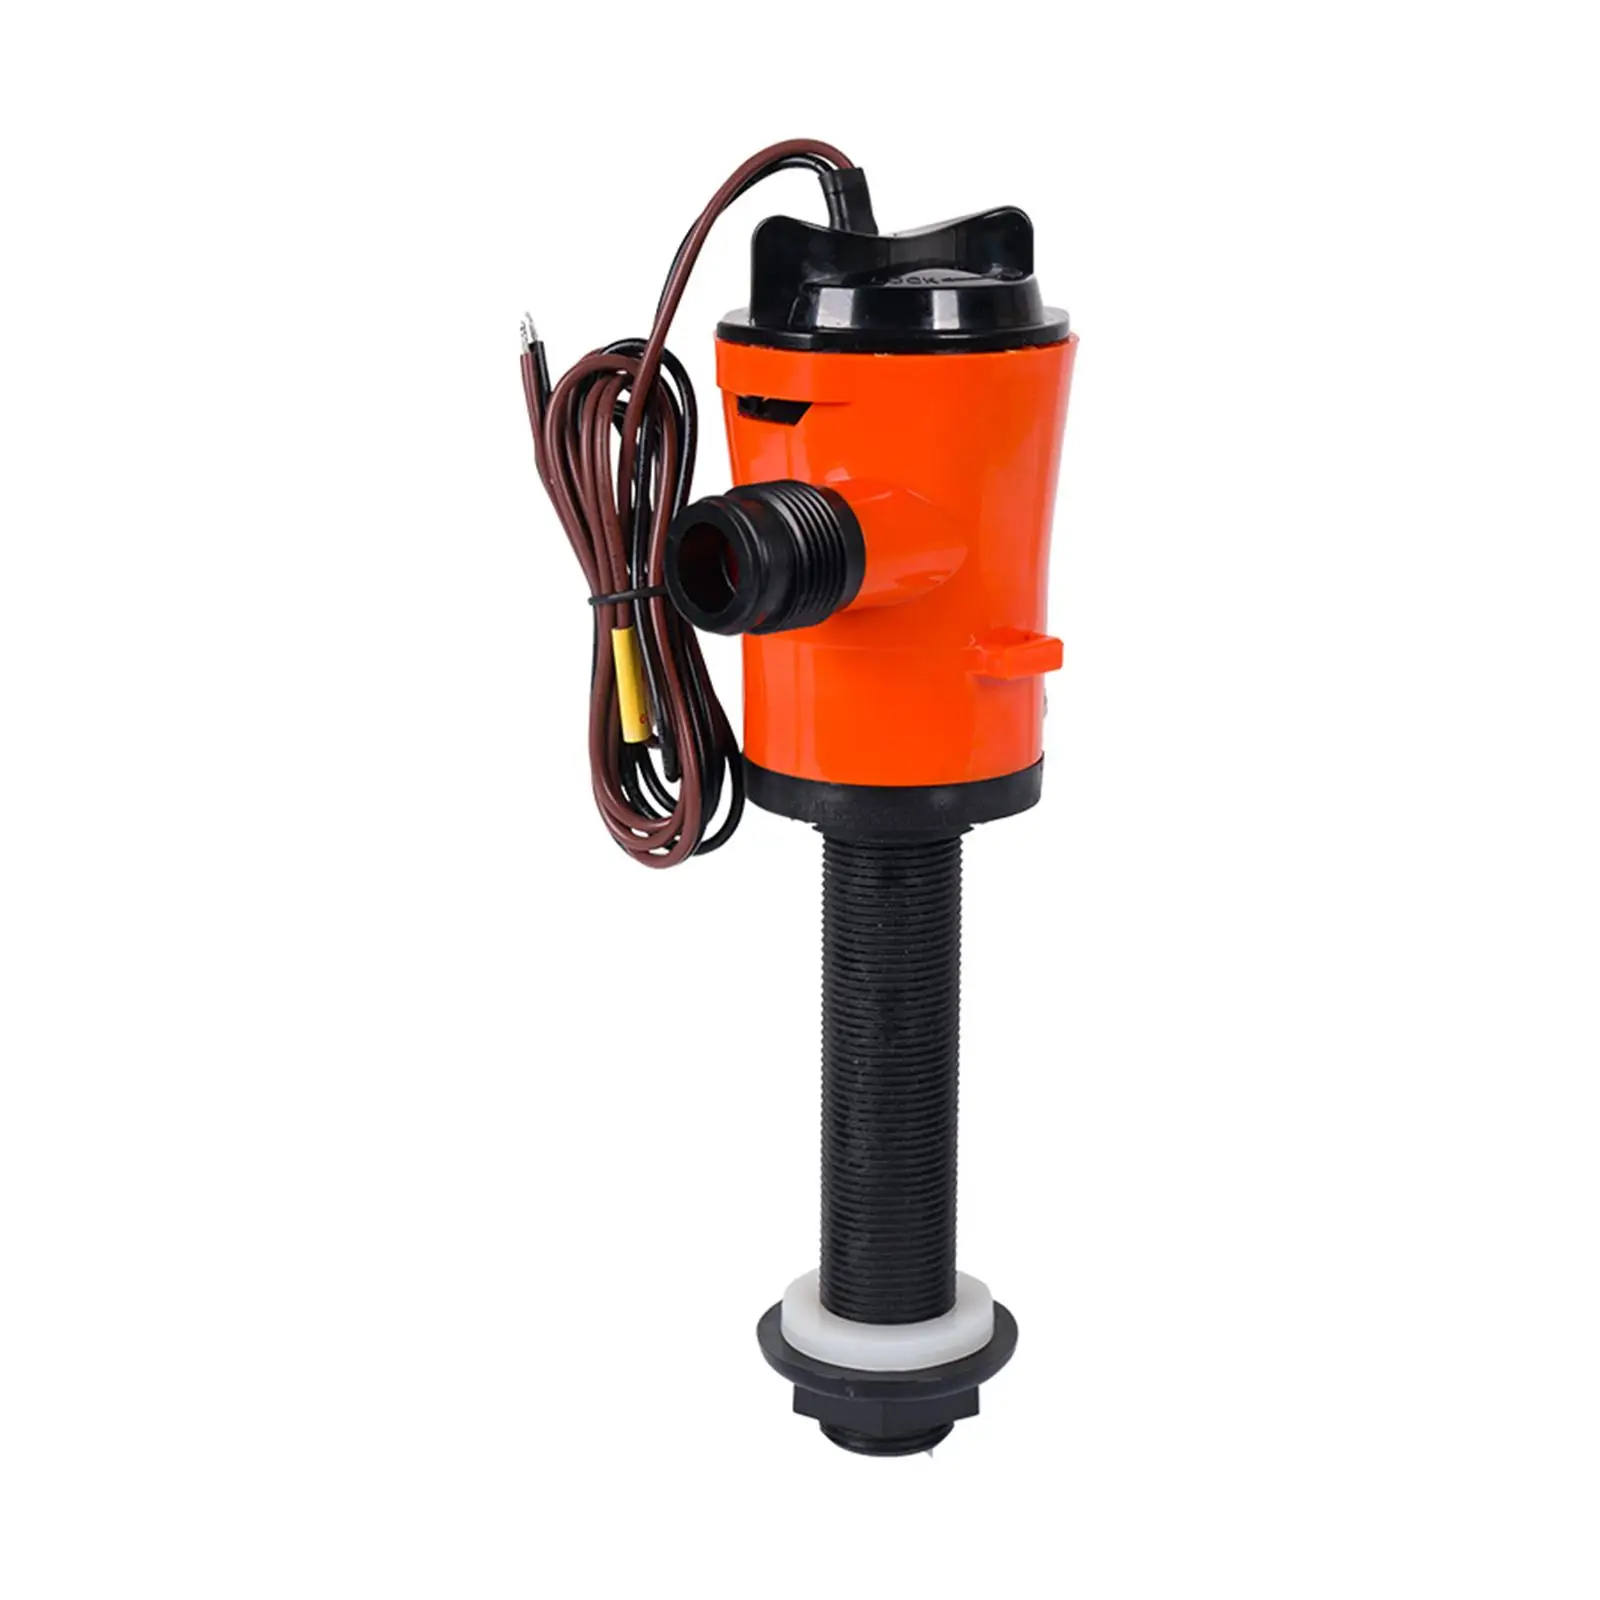 Aerator Livewell Pump with Filter Easy Installation Boat Tools Replacement Accessory Durable Professional Boat Bilge Pump